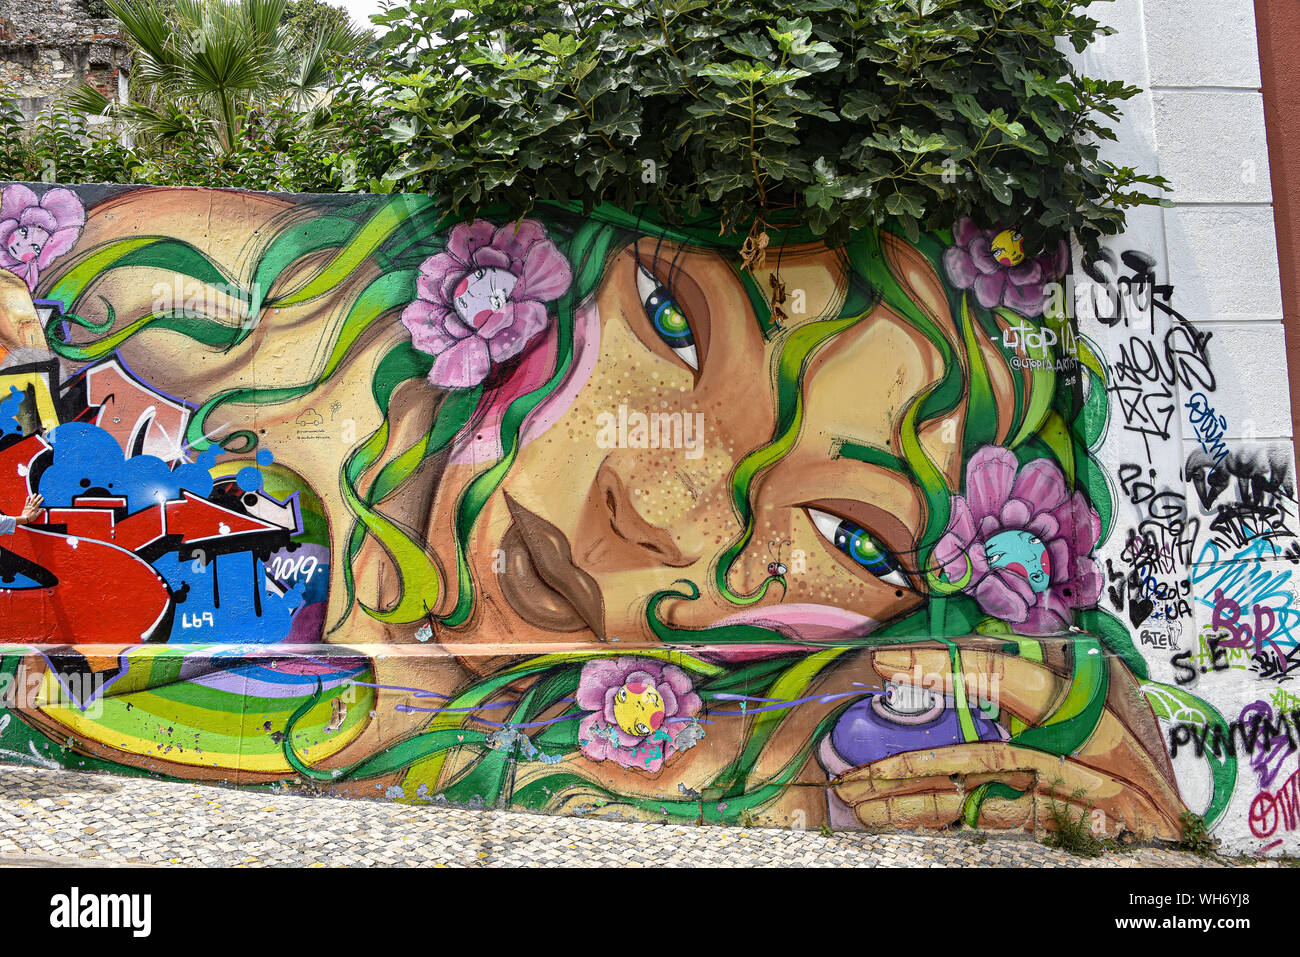 Lisbon, Portugal - July 27, 2019: Examples of colorful Graffiti art on the streets of Lisbon Stock Photo